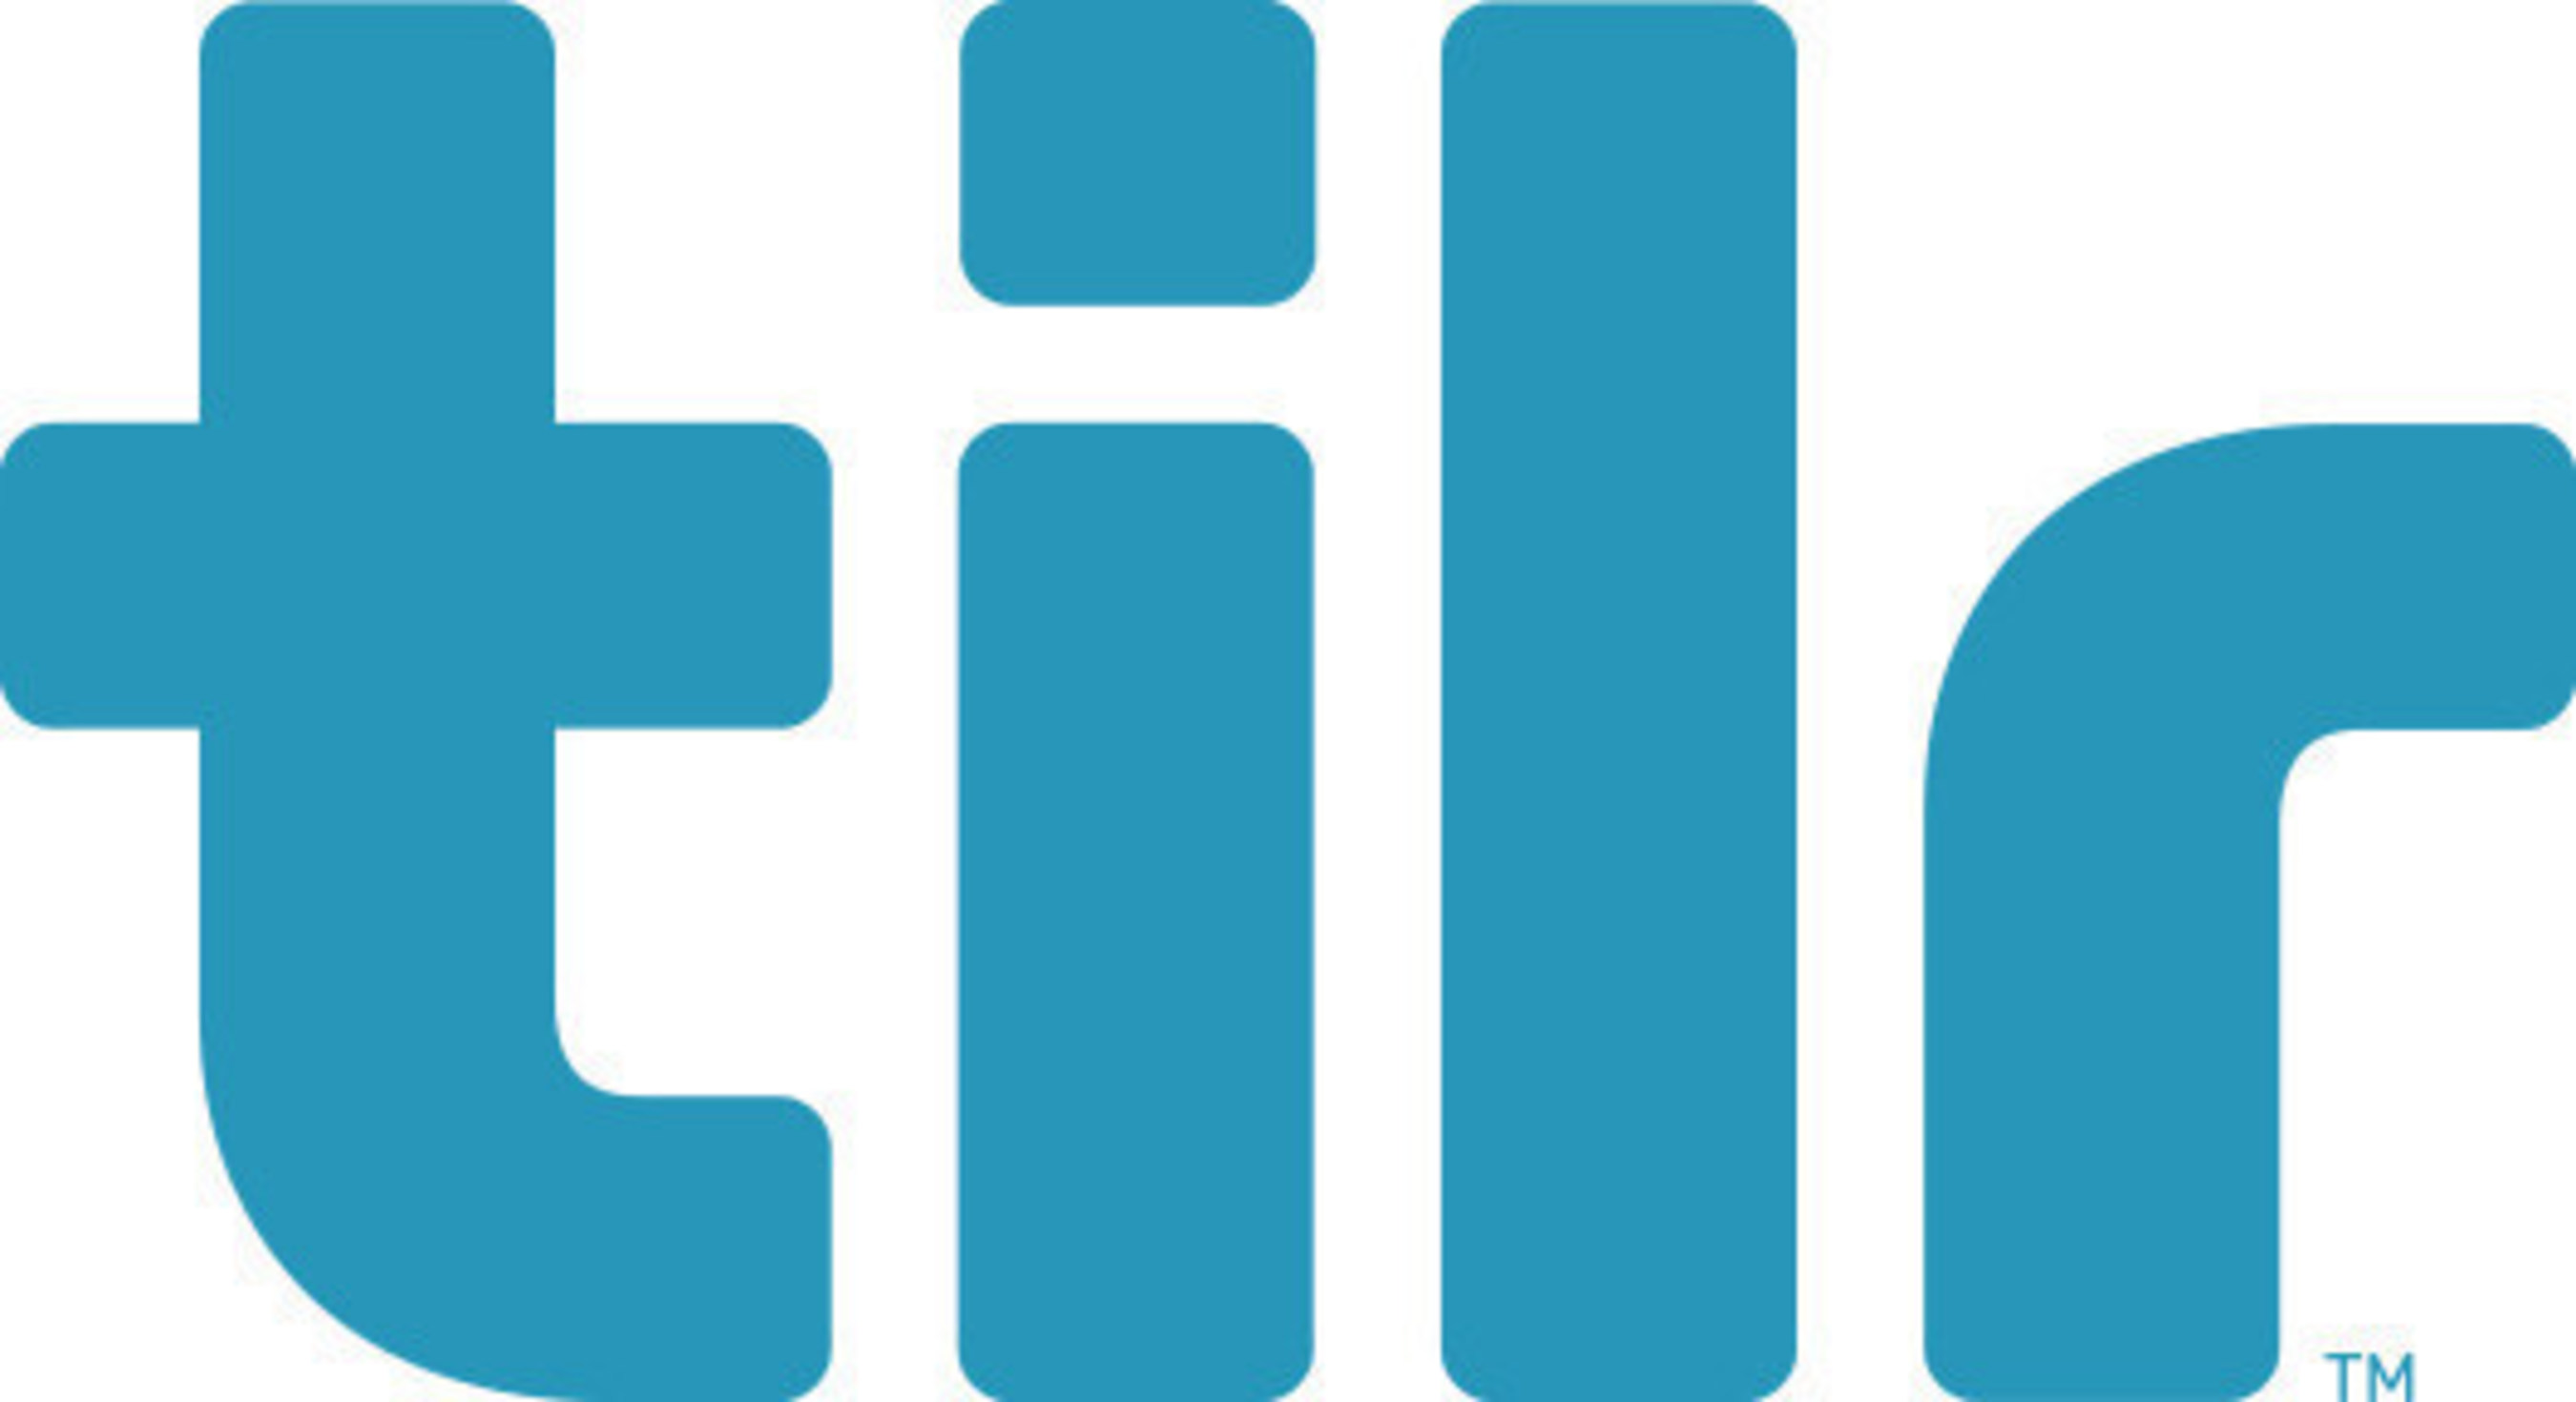 tilr connects workers to jobs via a unique algorithm focused on skills, not titles.